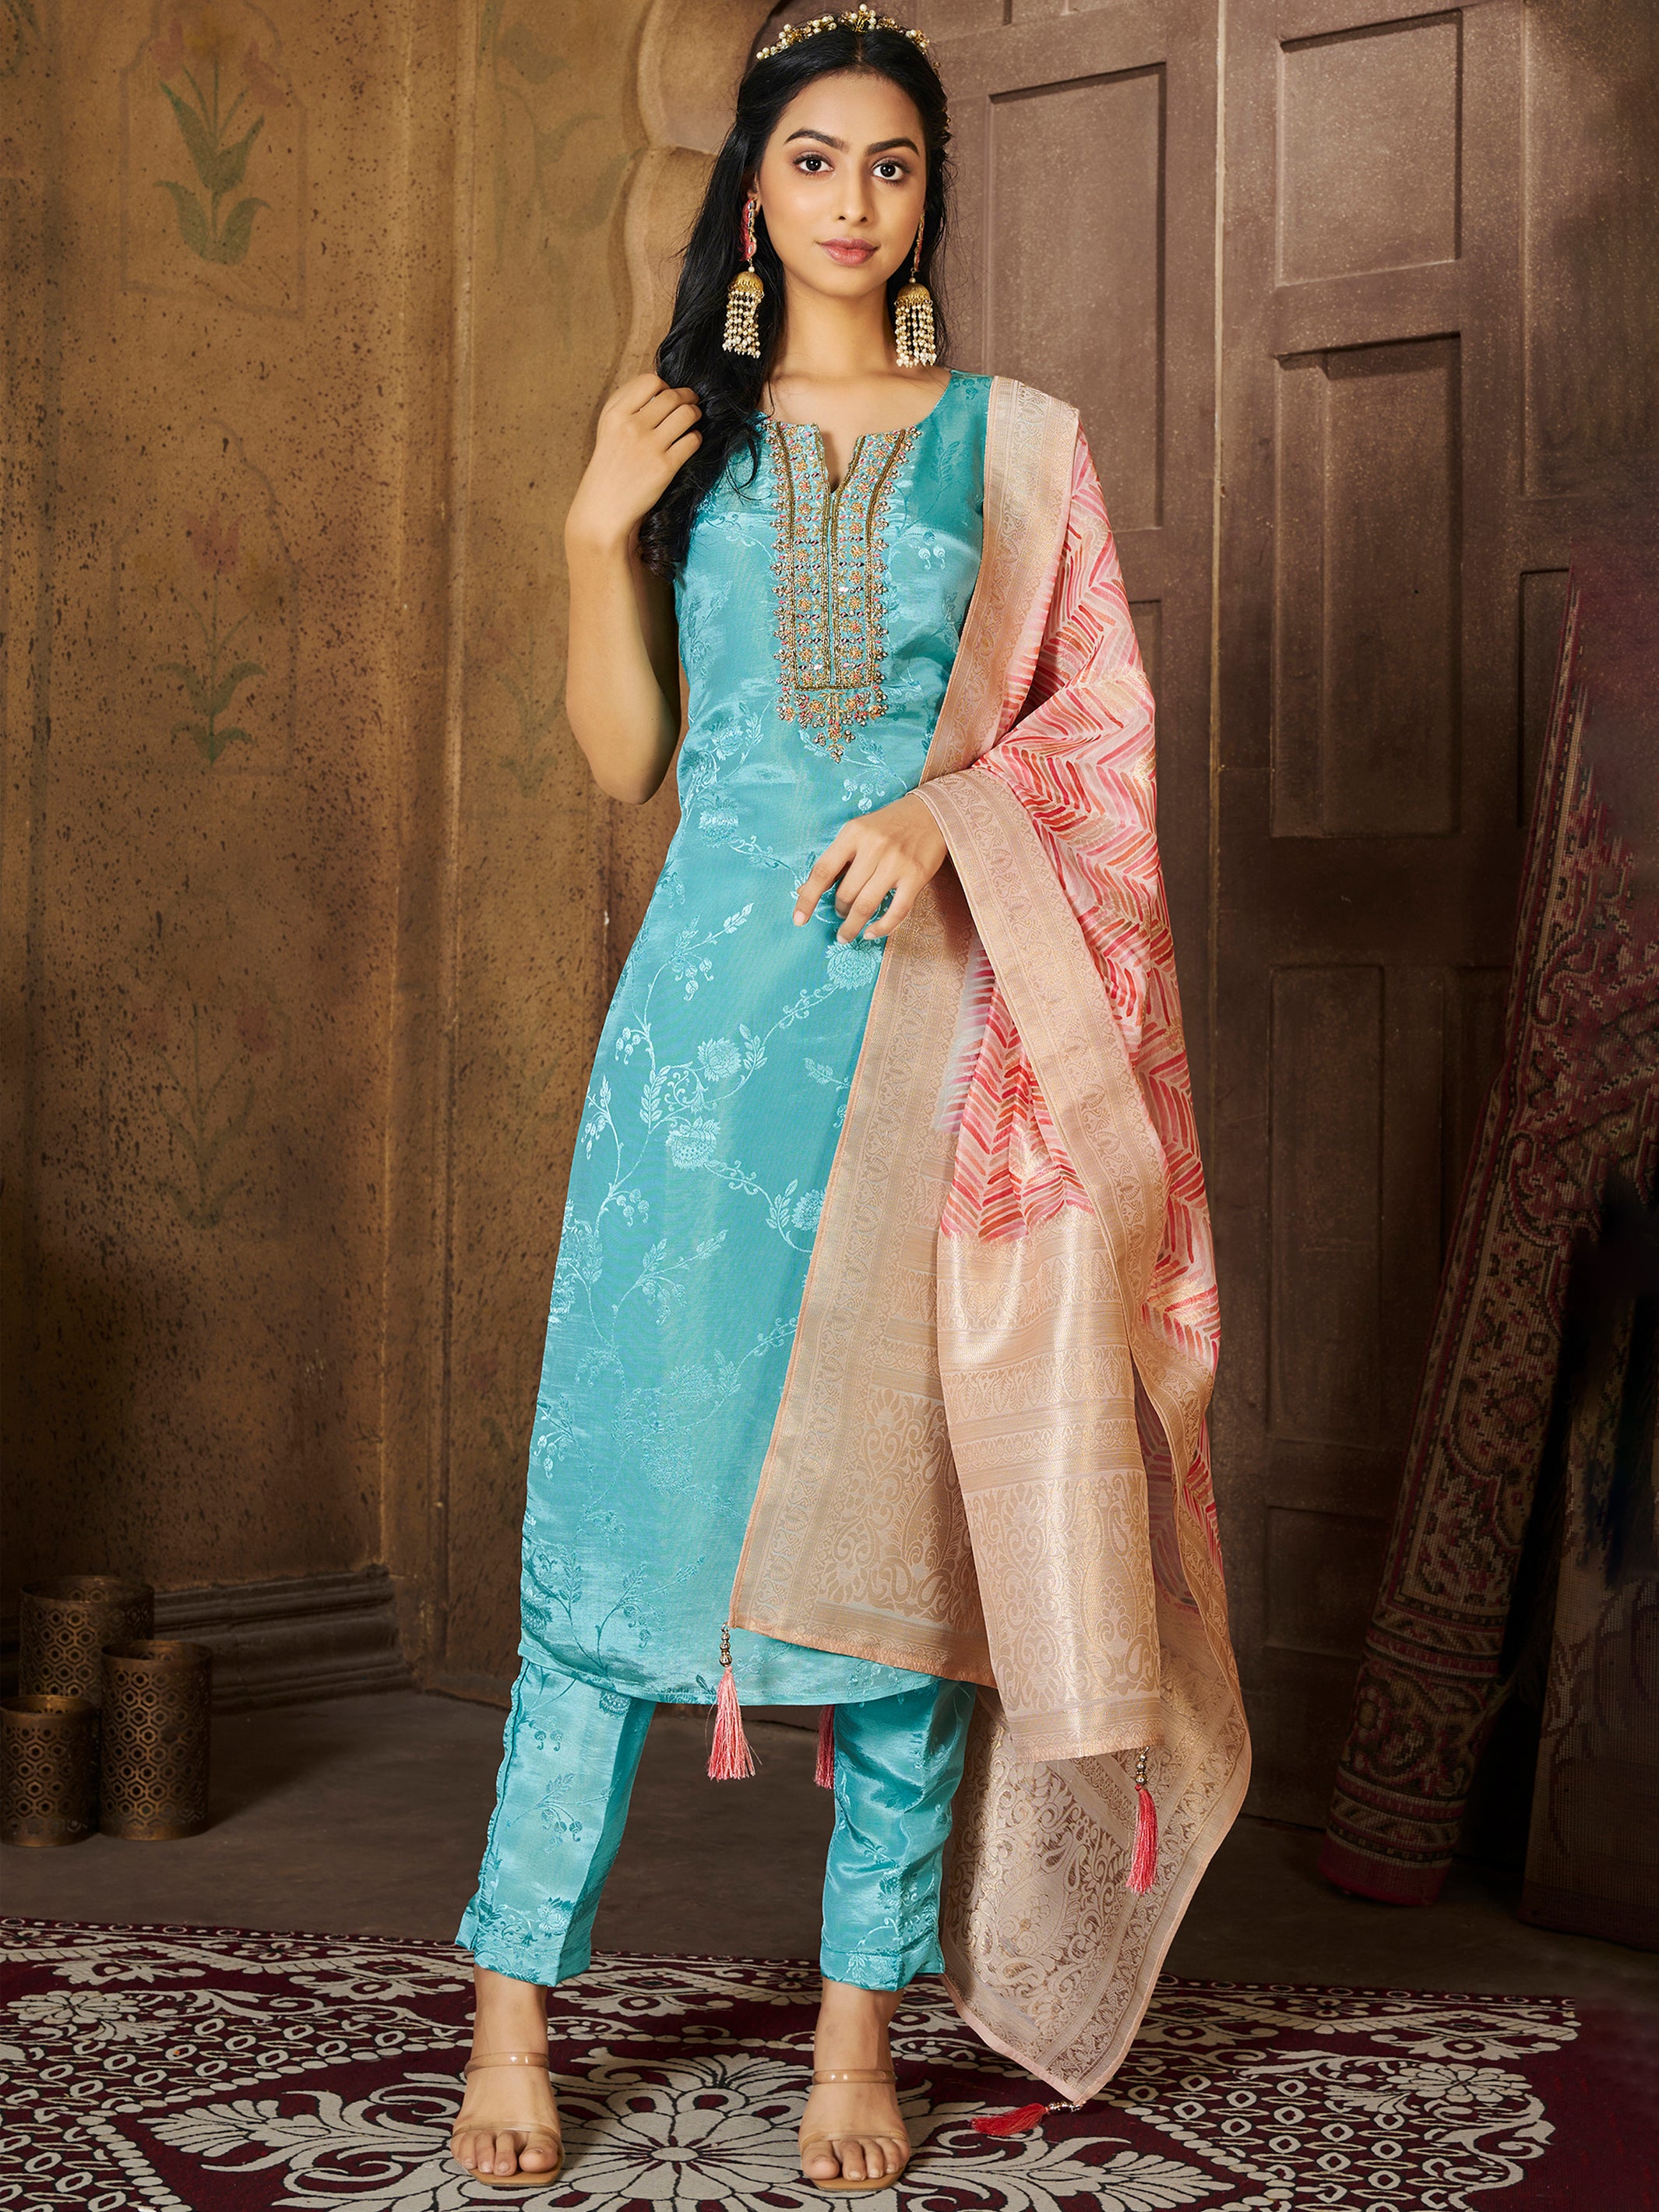 Ladyline Cotton Chikhan Work Printed Salwar Kameez Suit Embroidered with  Pure Chiffon Dupatta  Pants Sea Green in Mumbai at best price by ladyline  store  Justdial